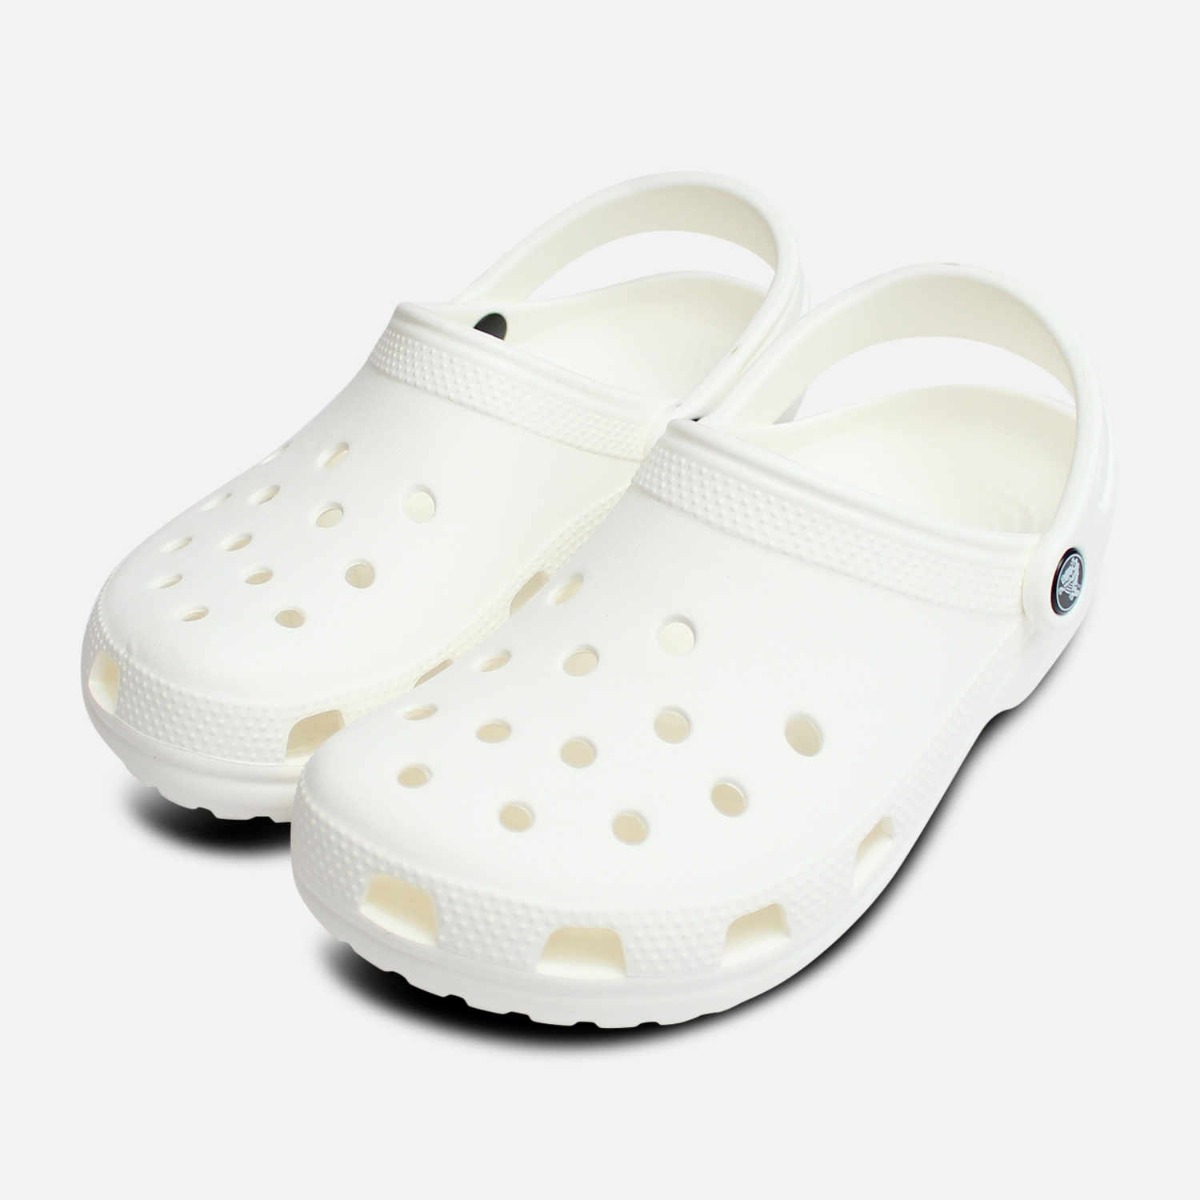 Ice White Classic Crocs Clog Shoes for Women | eBay